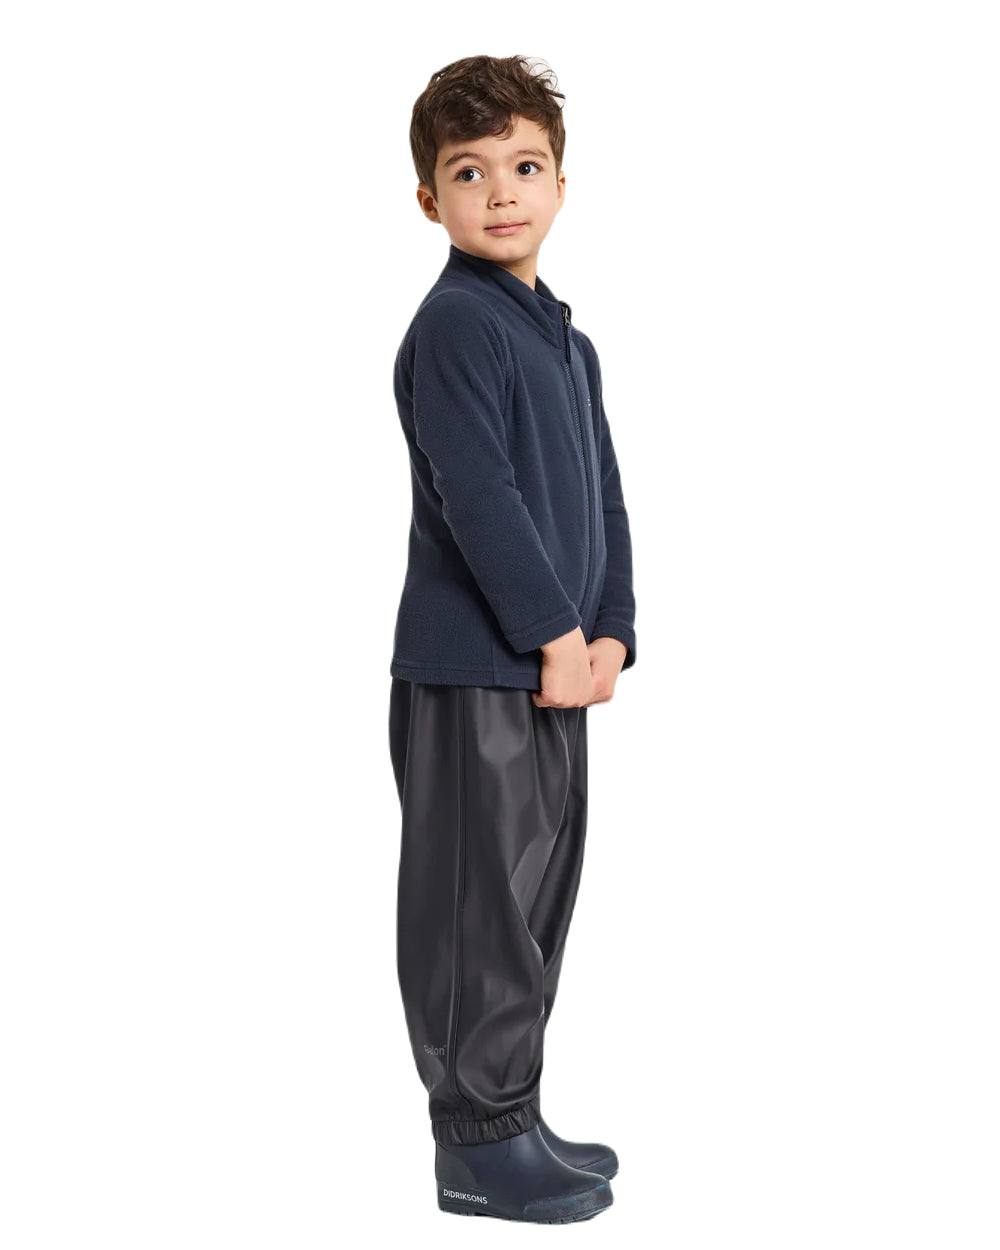 Black Coloured Didriksons Midjeman Childrens Pants Galon On A White Background 